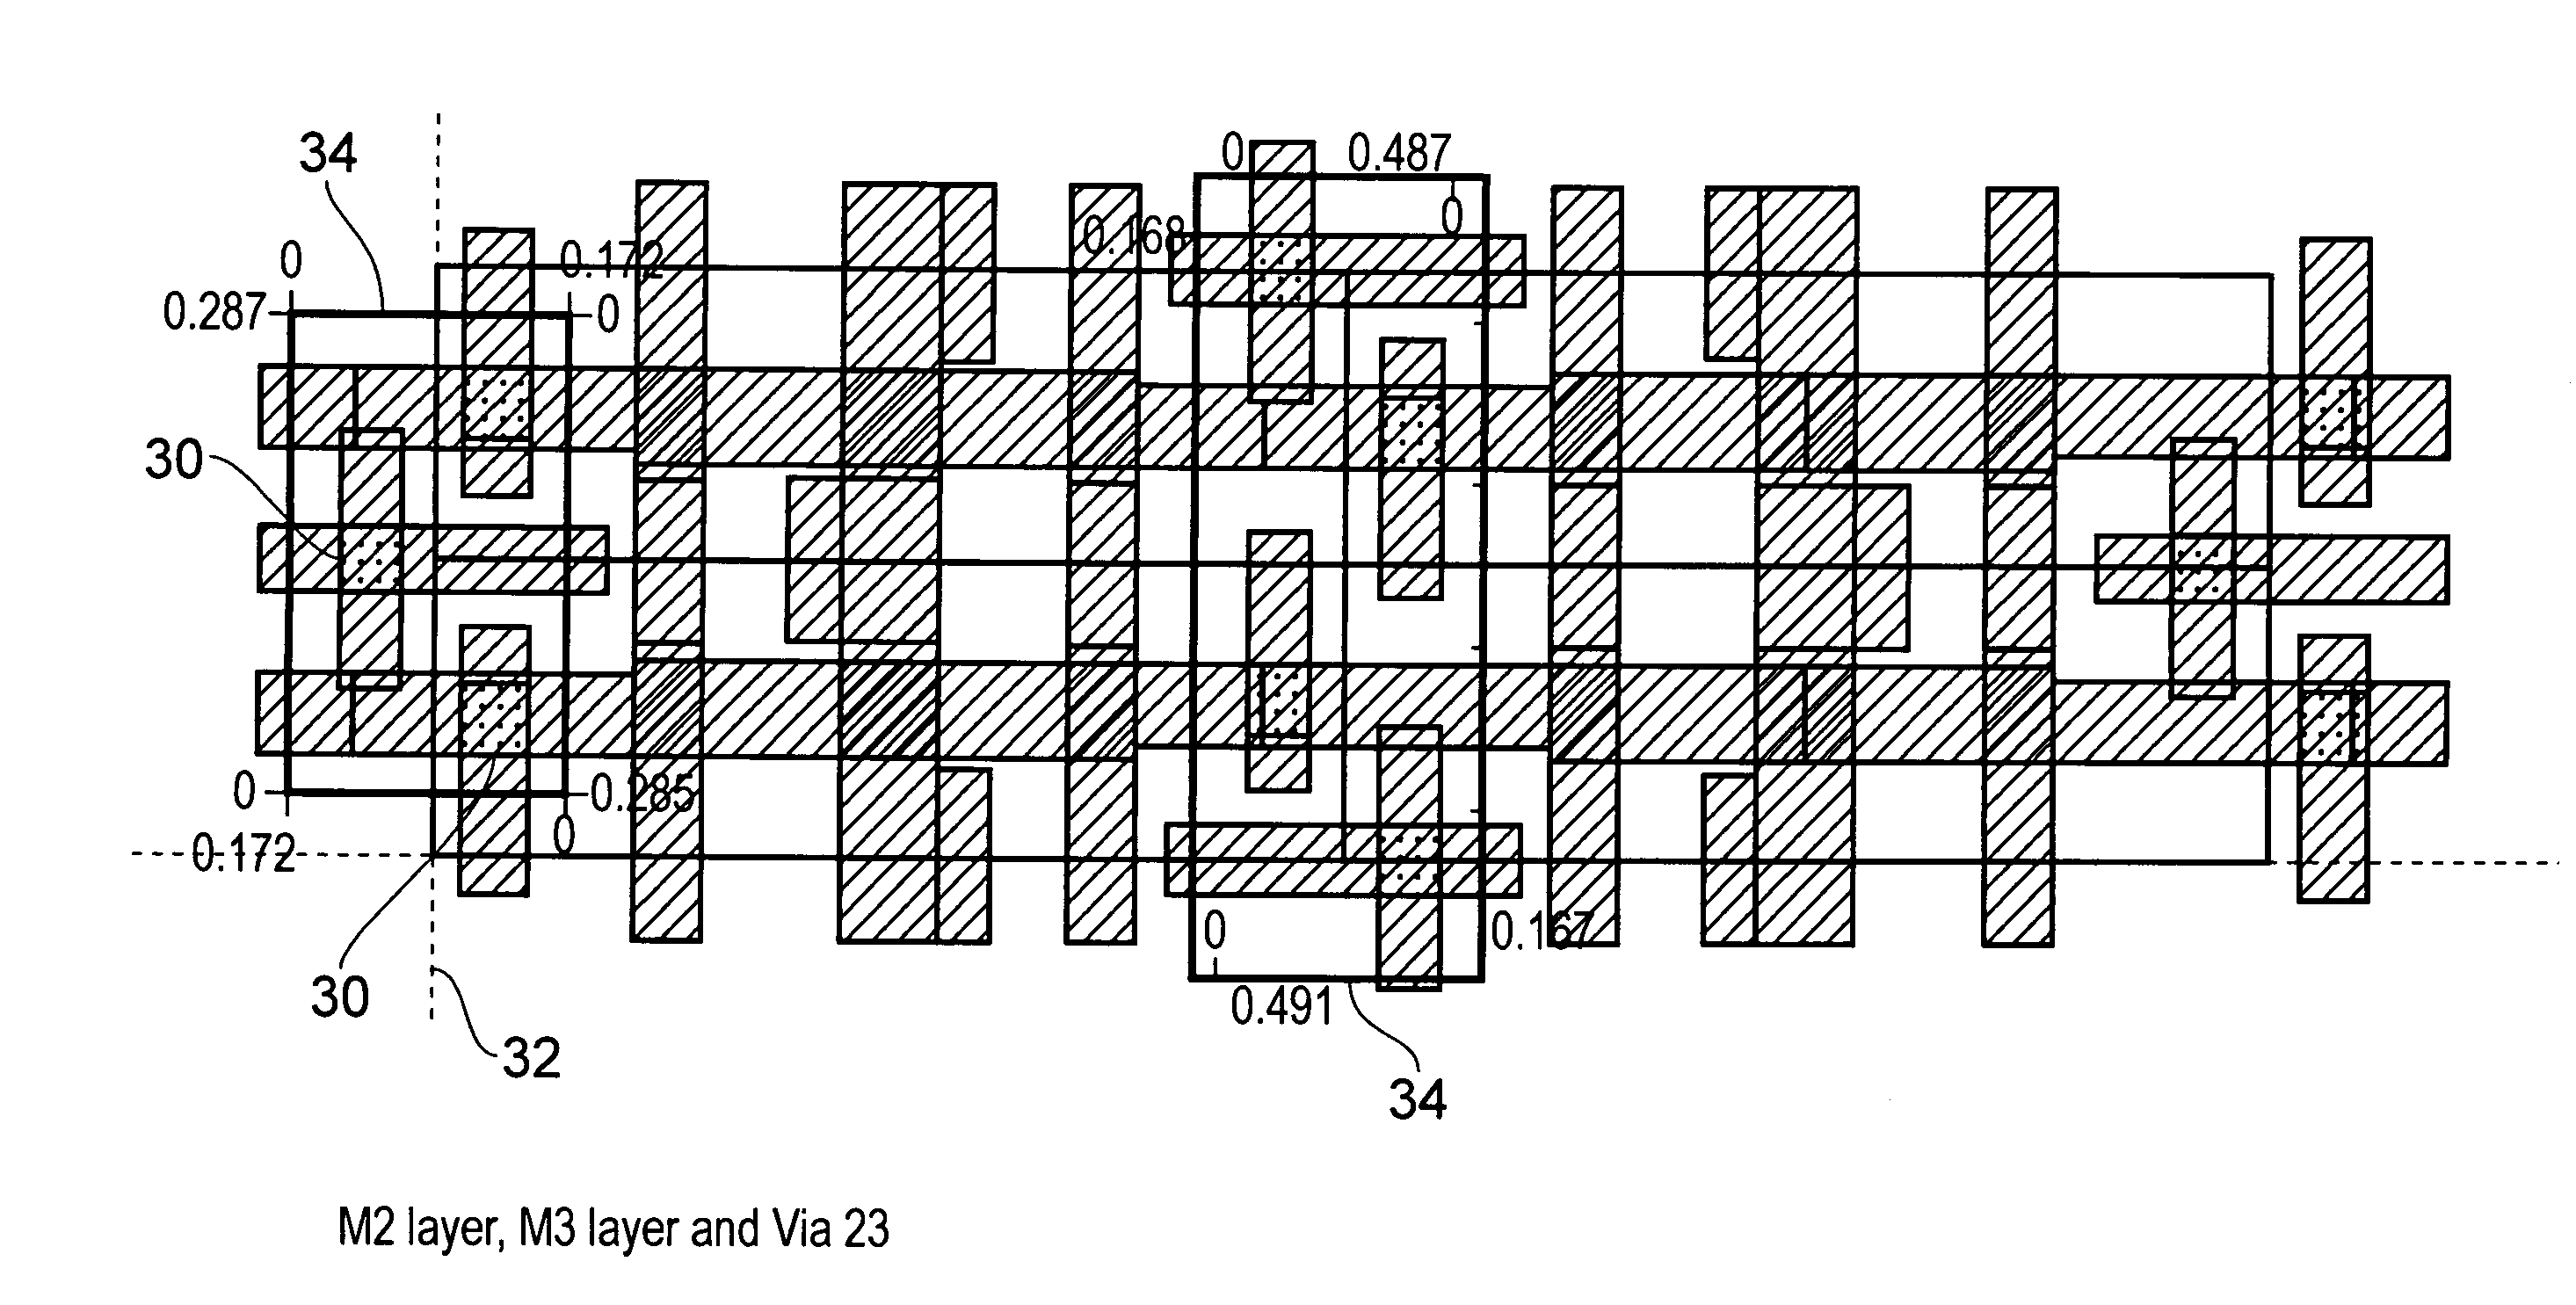 Word line and power conductor within a metal layer of a memory cell